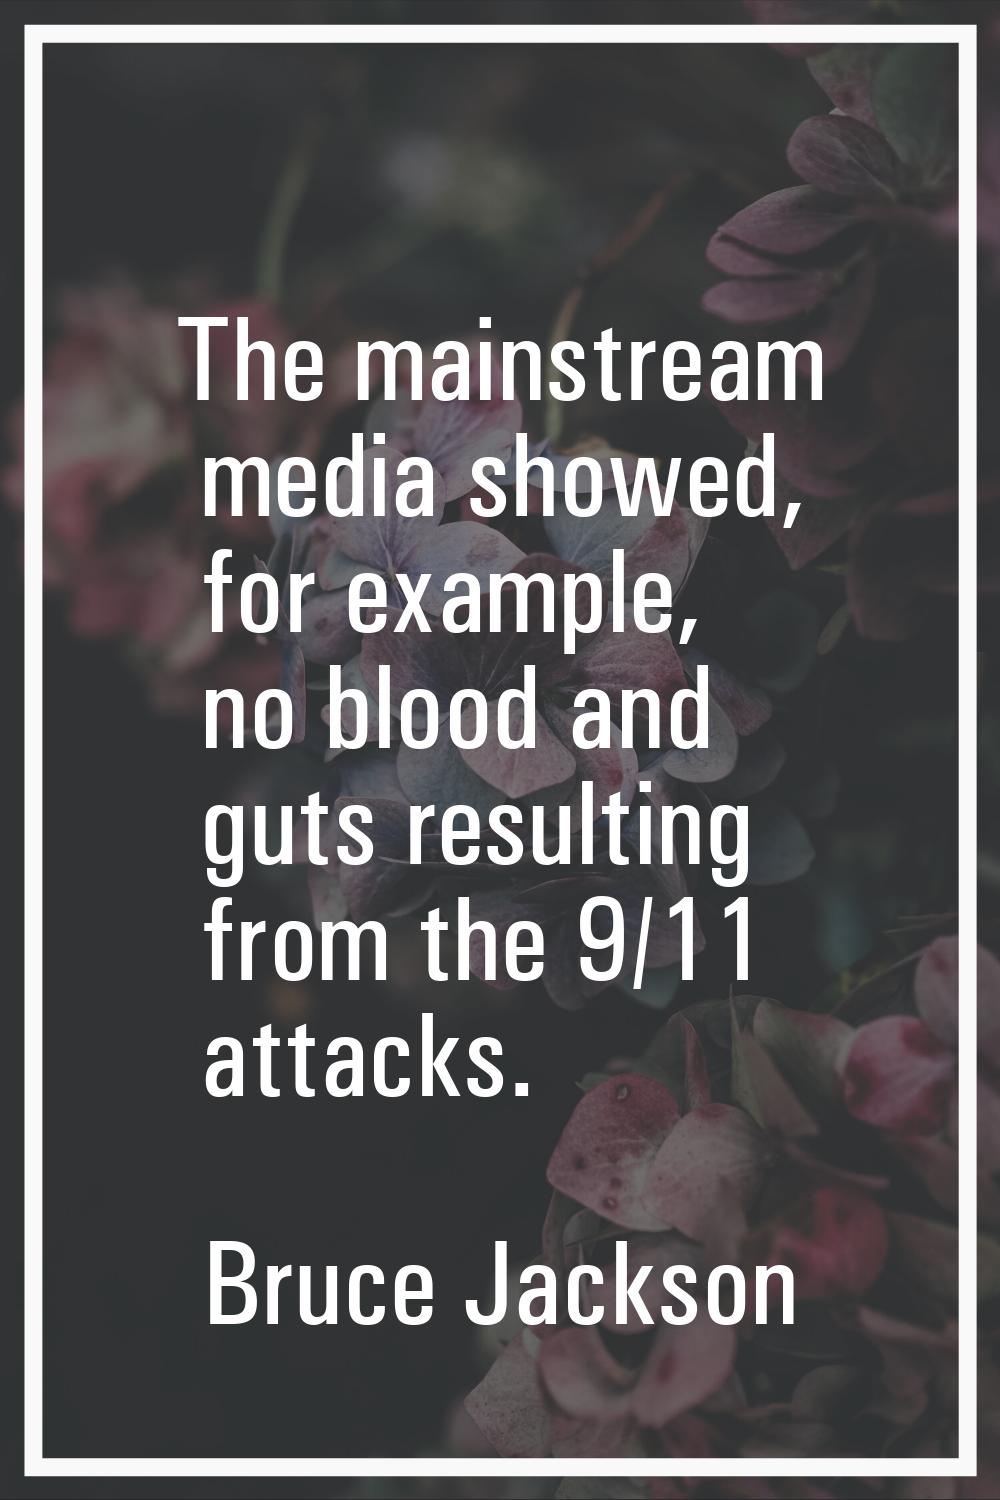 The mainstream media showed, for example, no blood and guts resulting from the 9/11 attacks.